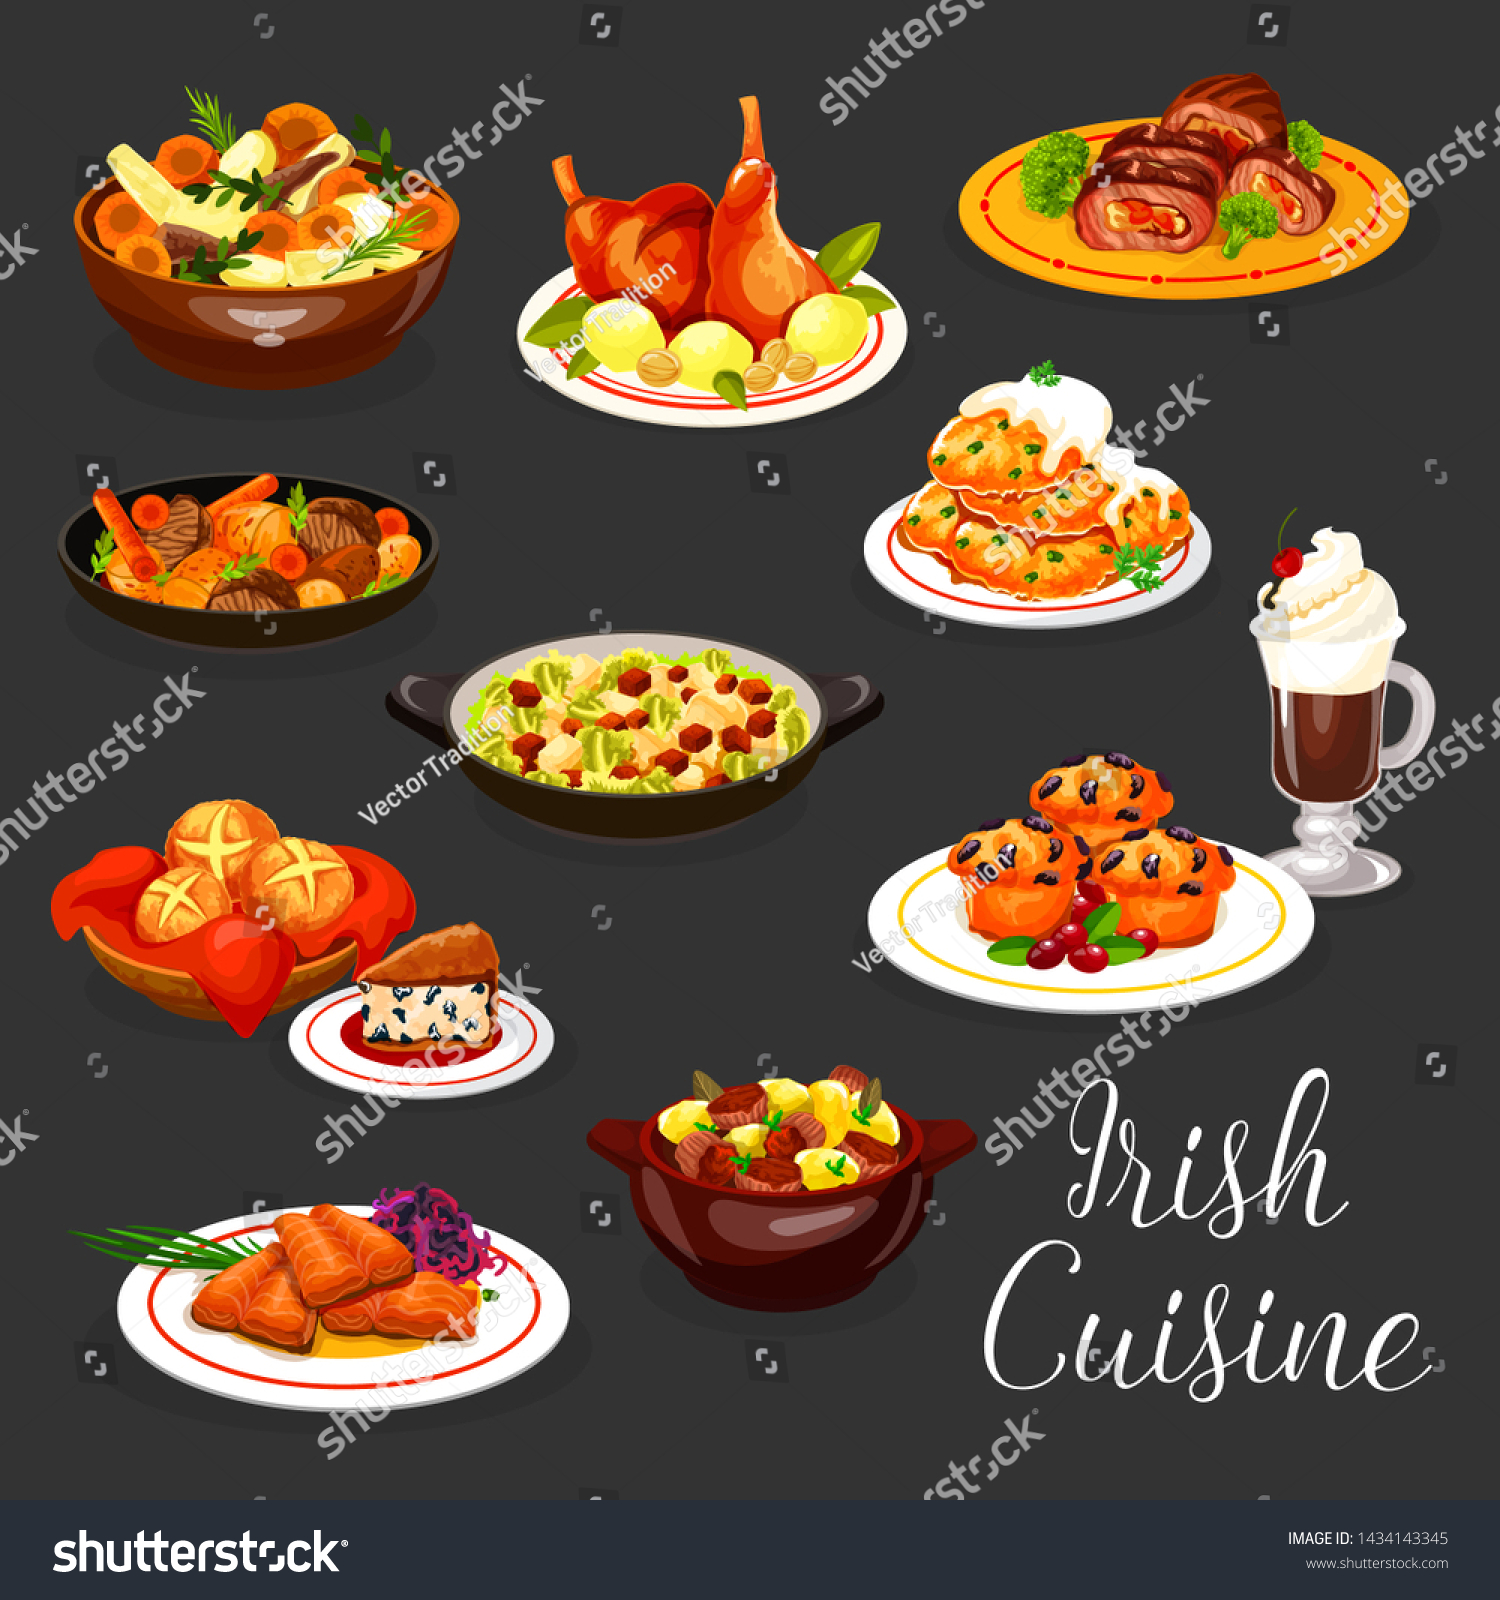 SVG of Irish cuisine vector fish and meat with coffee and dessert. Salmon with red cabbage salad, potato pancake, lamb and rabbit vegetable stews, stuffed beef, veggie casserole, berry cupcake and soda bread svg